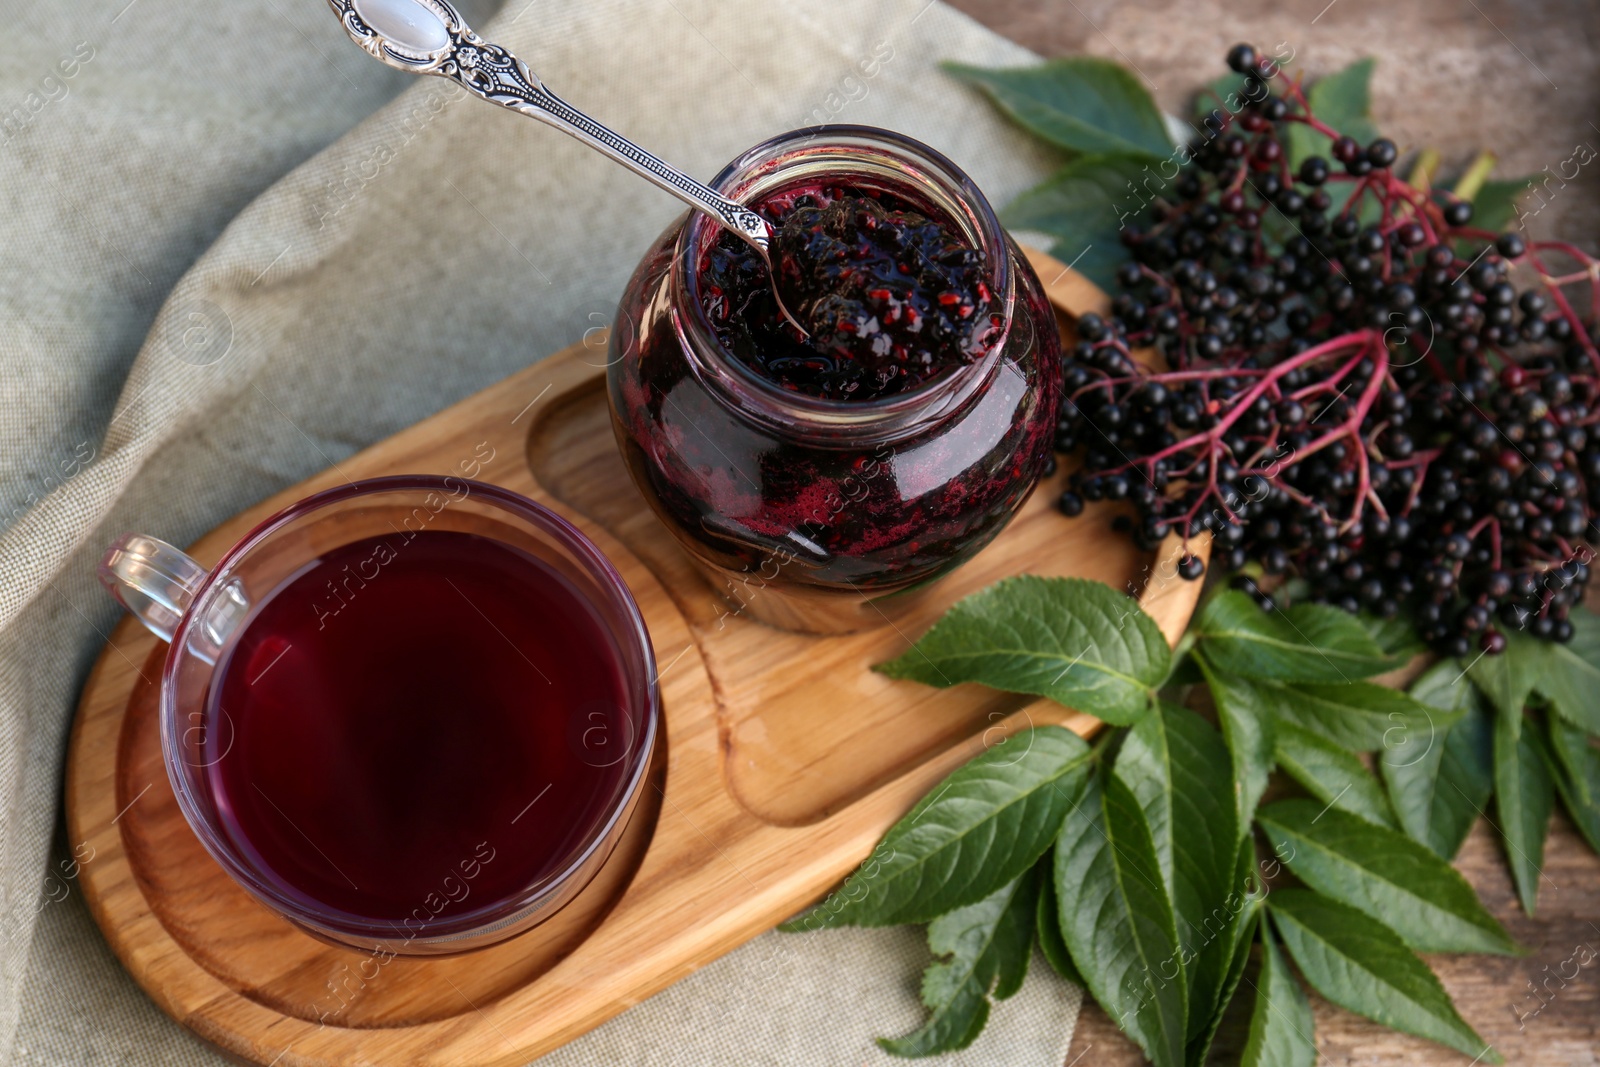 Photo of Elderberry jam, glass cup of tea and Sambucus berries on table, above view